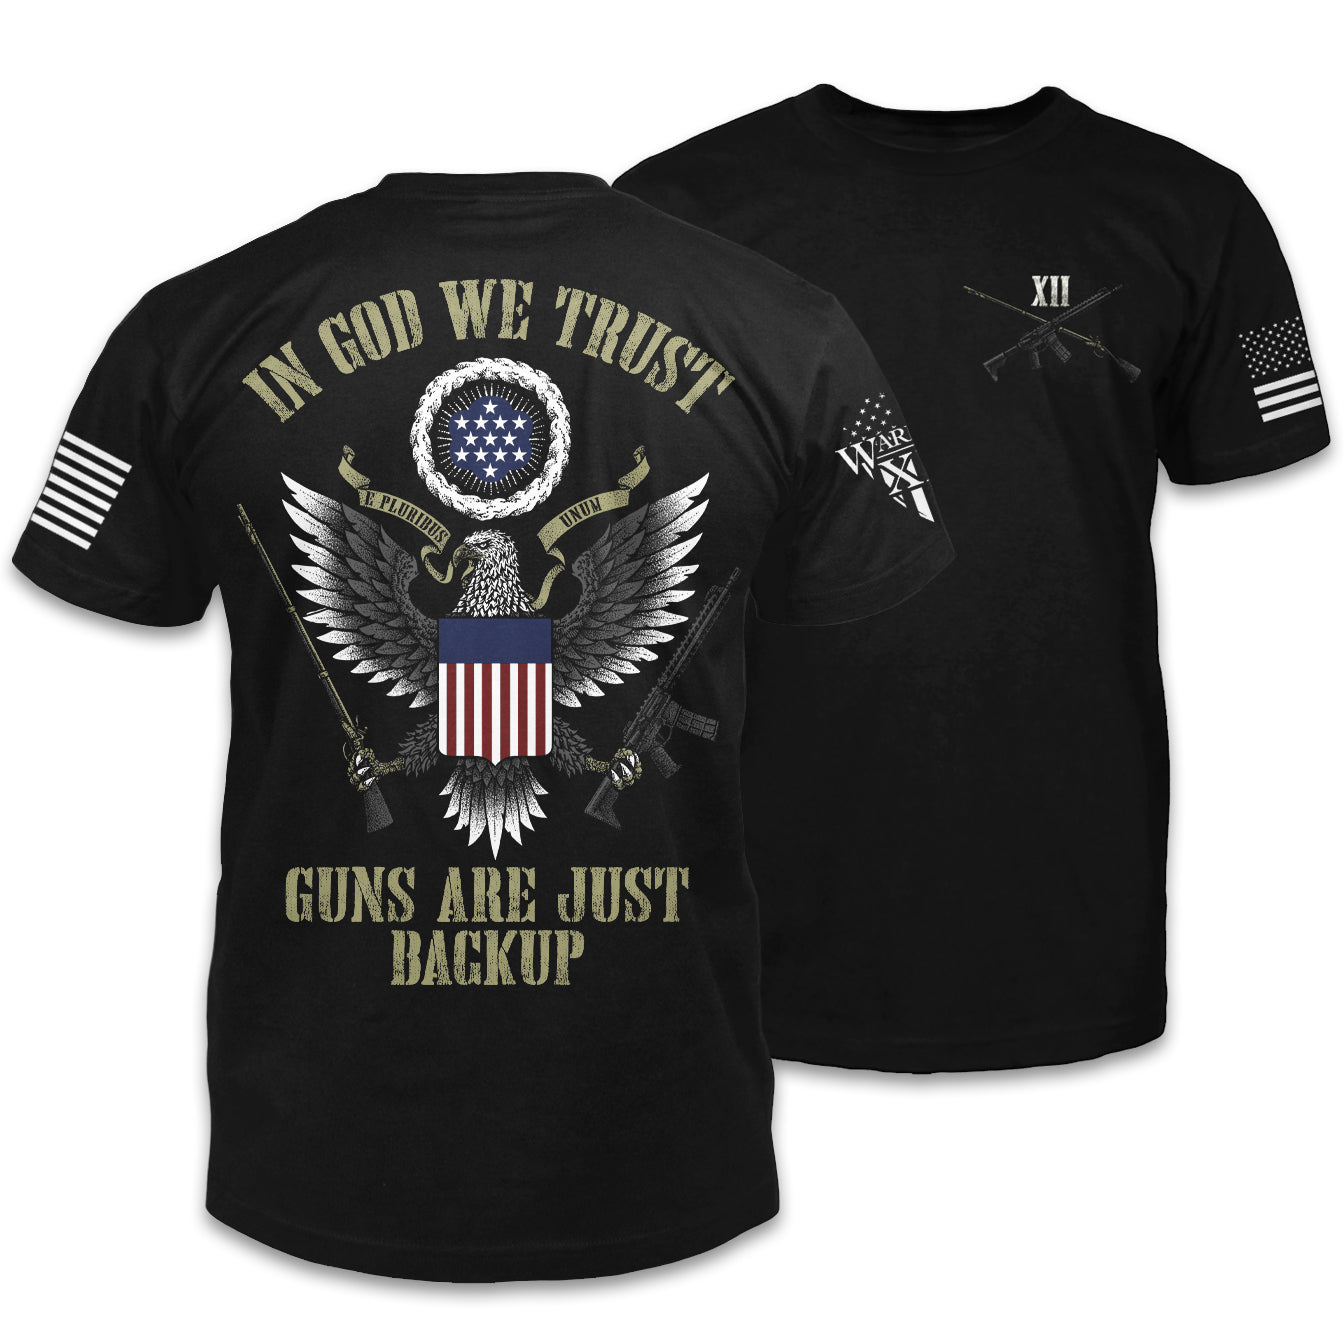 Front & back black t-shirt with the words "In God we trust, guns are just backup" with an american eagle and the USA flag printed on the shirt.